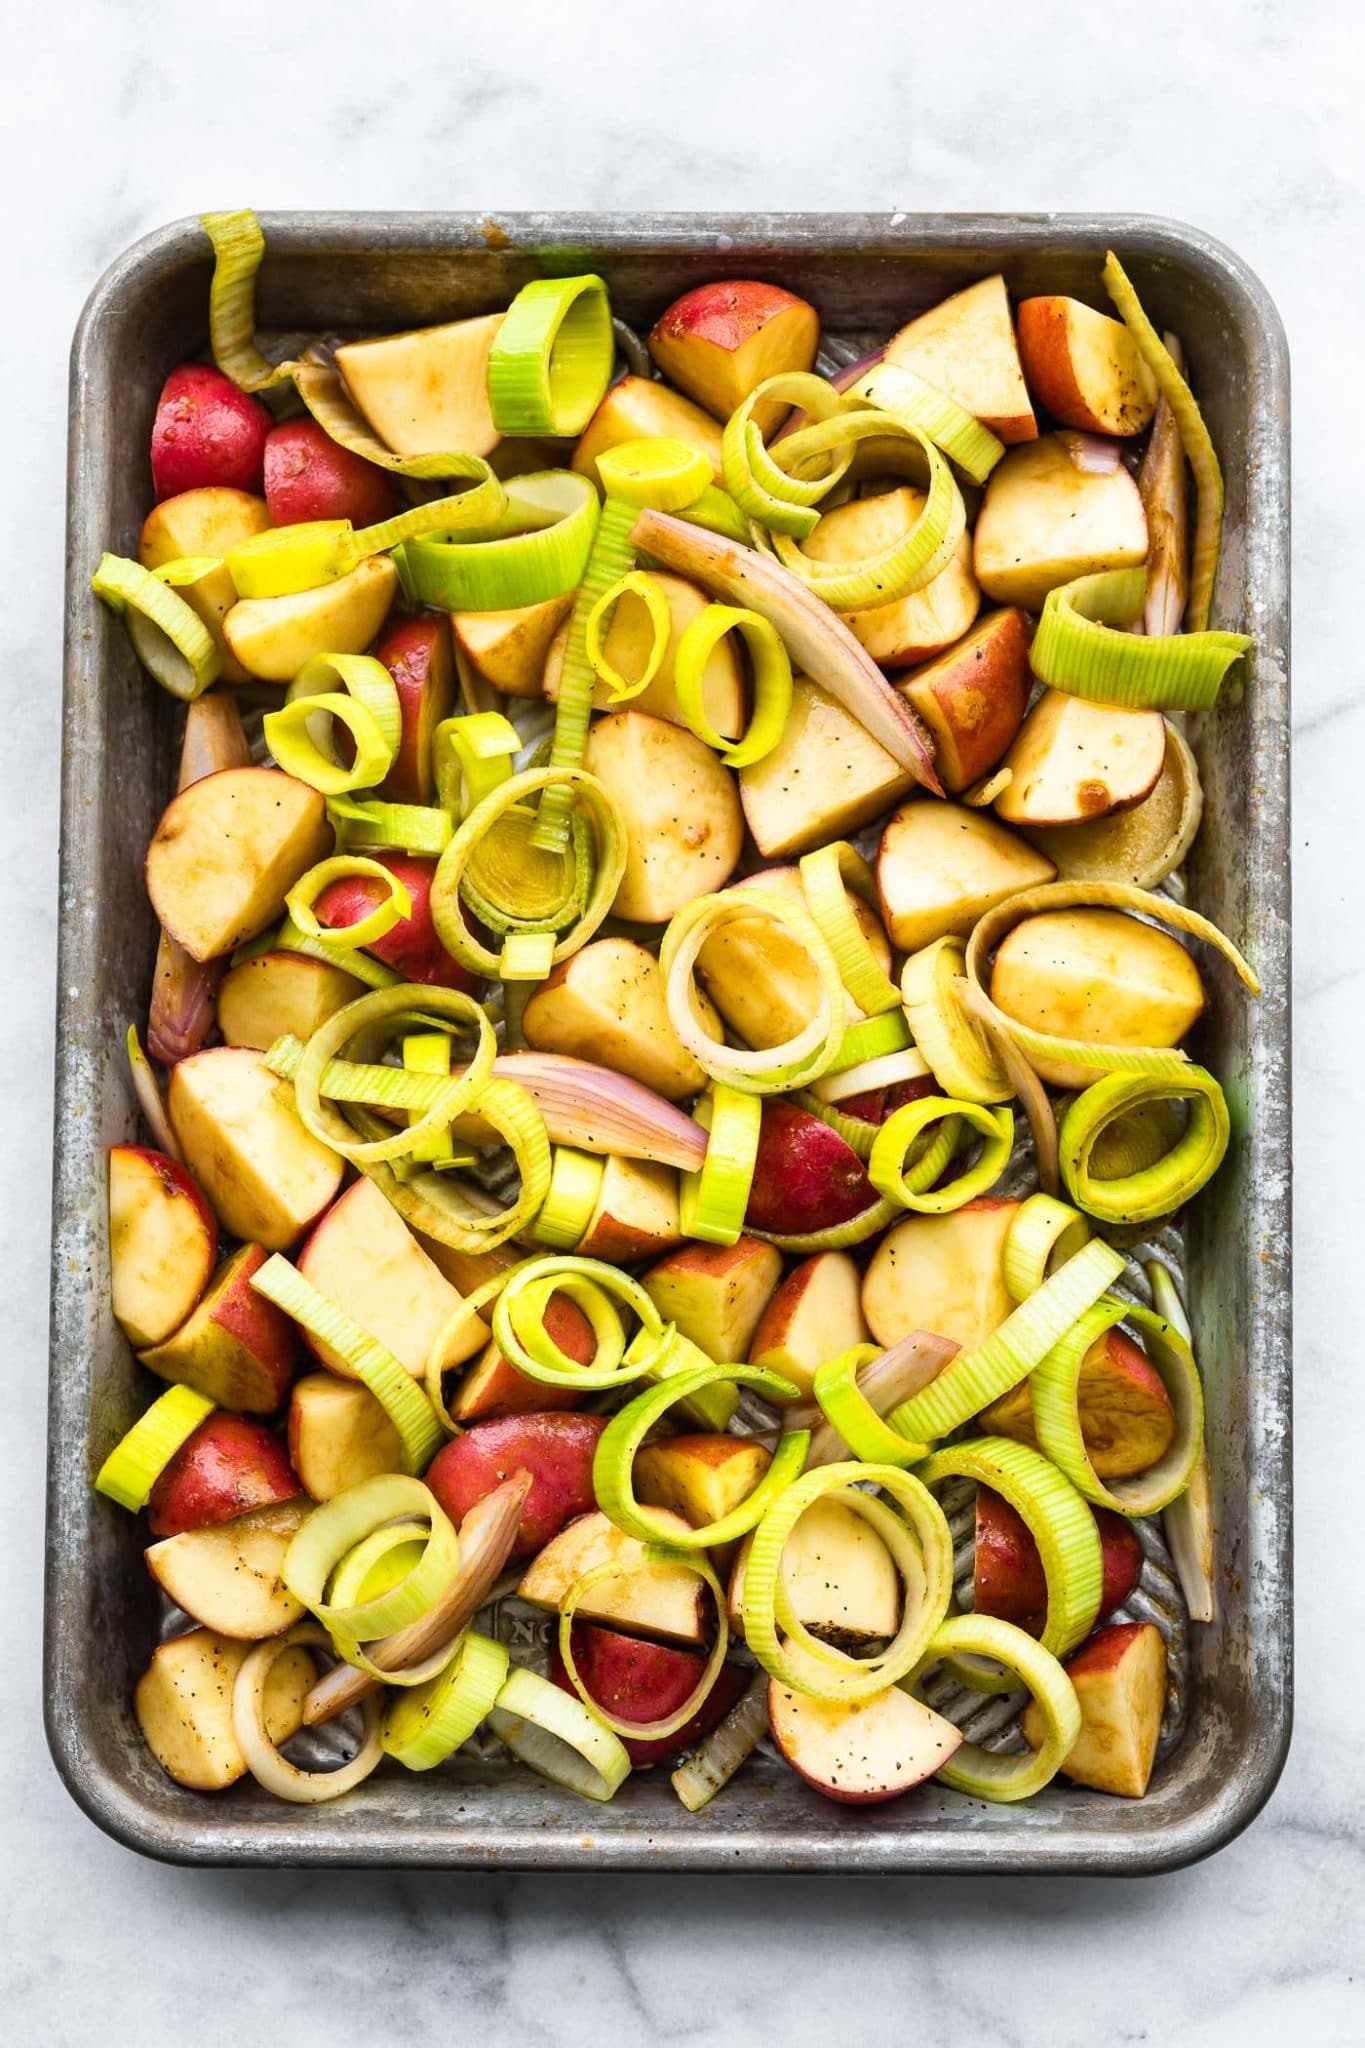 a sheet pan full of raw red onions, red potatoes, and leeks sliced into rings